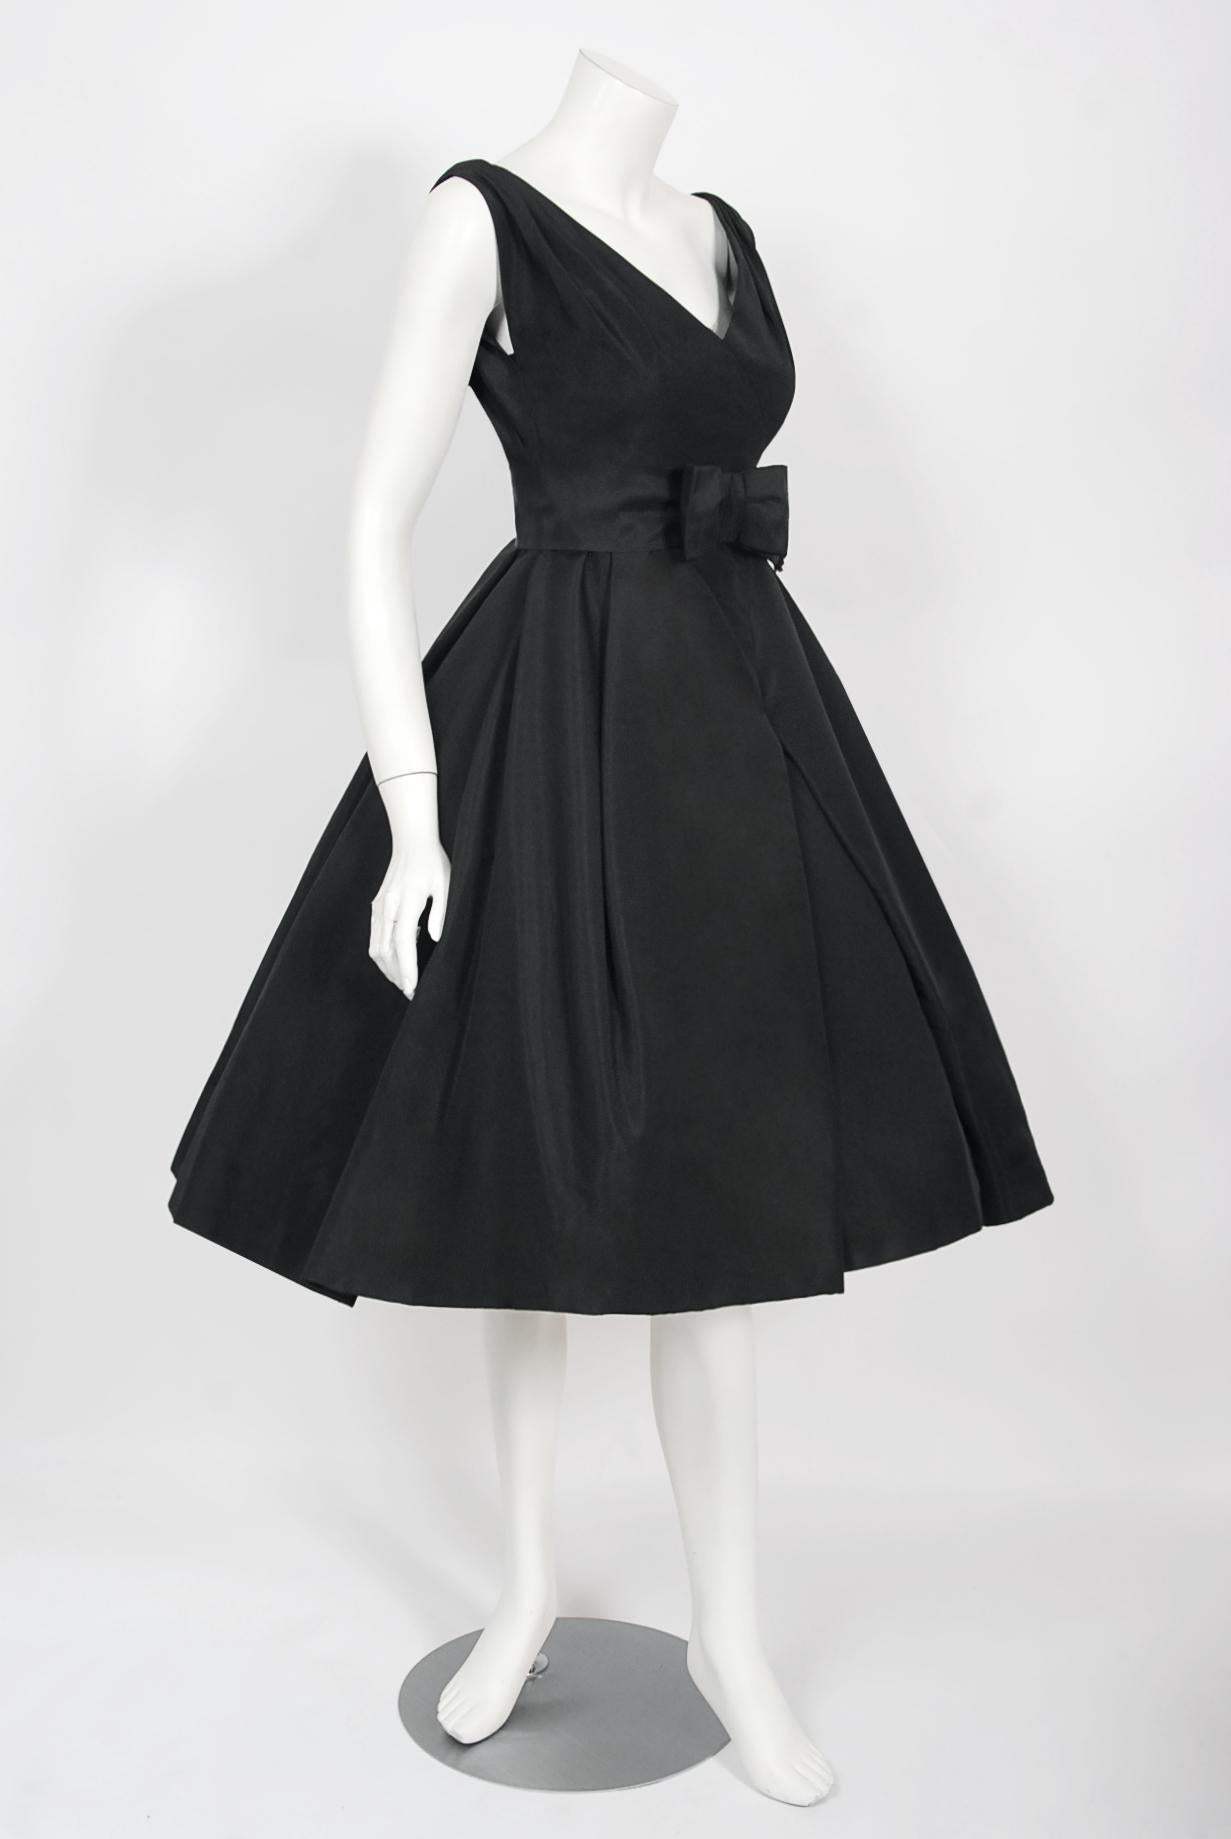 Women's Vintage 1956 Christian Dior Haute Couture Documented Black Silk 'New Look' Dress